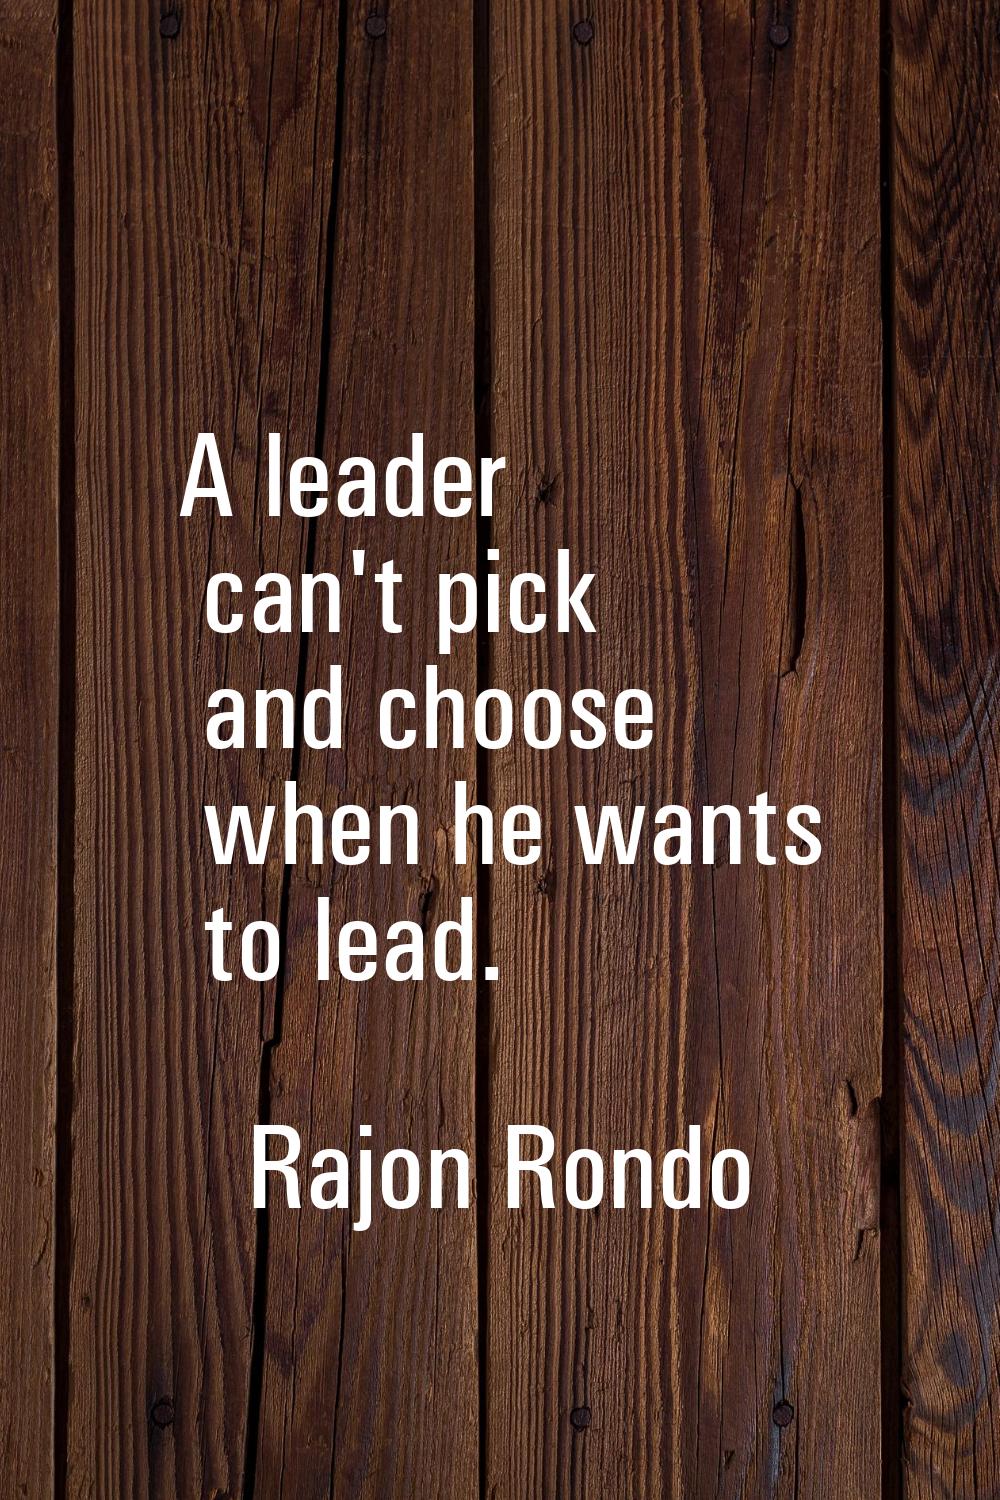 A leader can't pick and choose when he wants to lead.